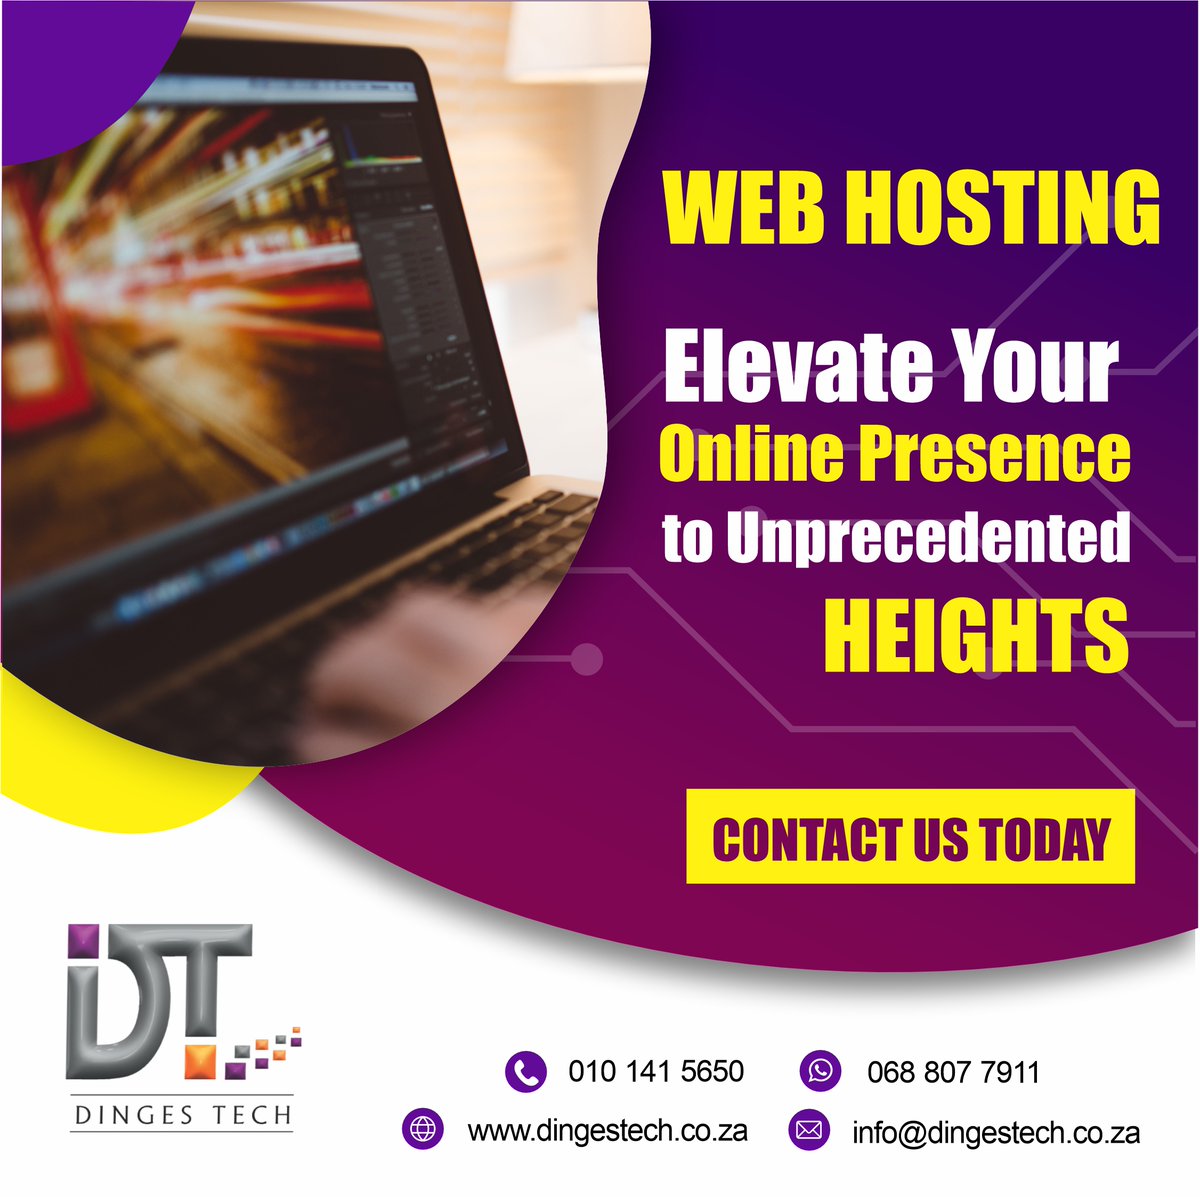 Your website is the digital face of your business or passion project. Make sure it's fast, secure, and always online with our top-notch web hosting services.

Internet Almost Anywhere!

Website: dingestech.co.za

#webhosting  #HostingServices #WebsiteHosting #HOSTING